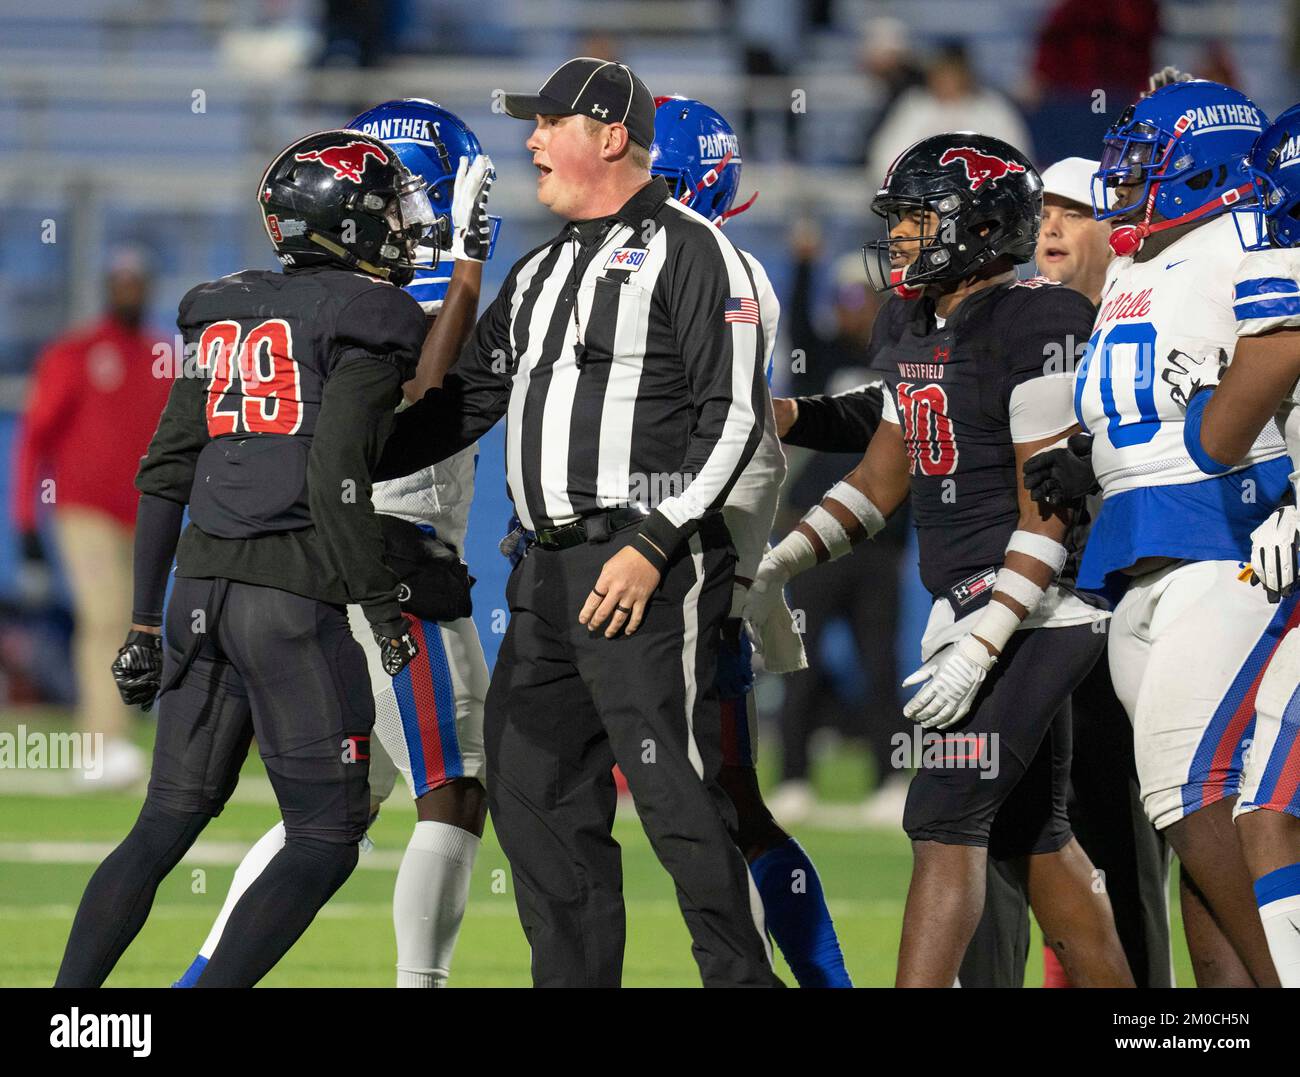 Georgetown Texas USA, December 3 2022: Referee tries to break up altercation between members of rival high school football teams at the end of a University Scholastic League (UIL) quarter-final playoff football game in central Texas. ©Bob Daemmrich Stock Photo